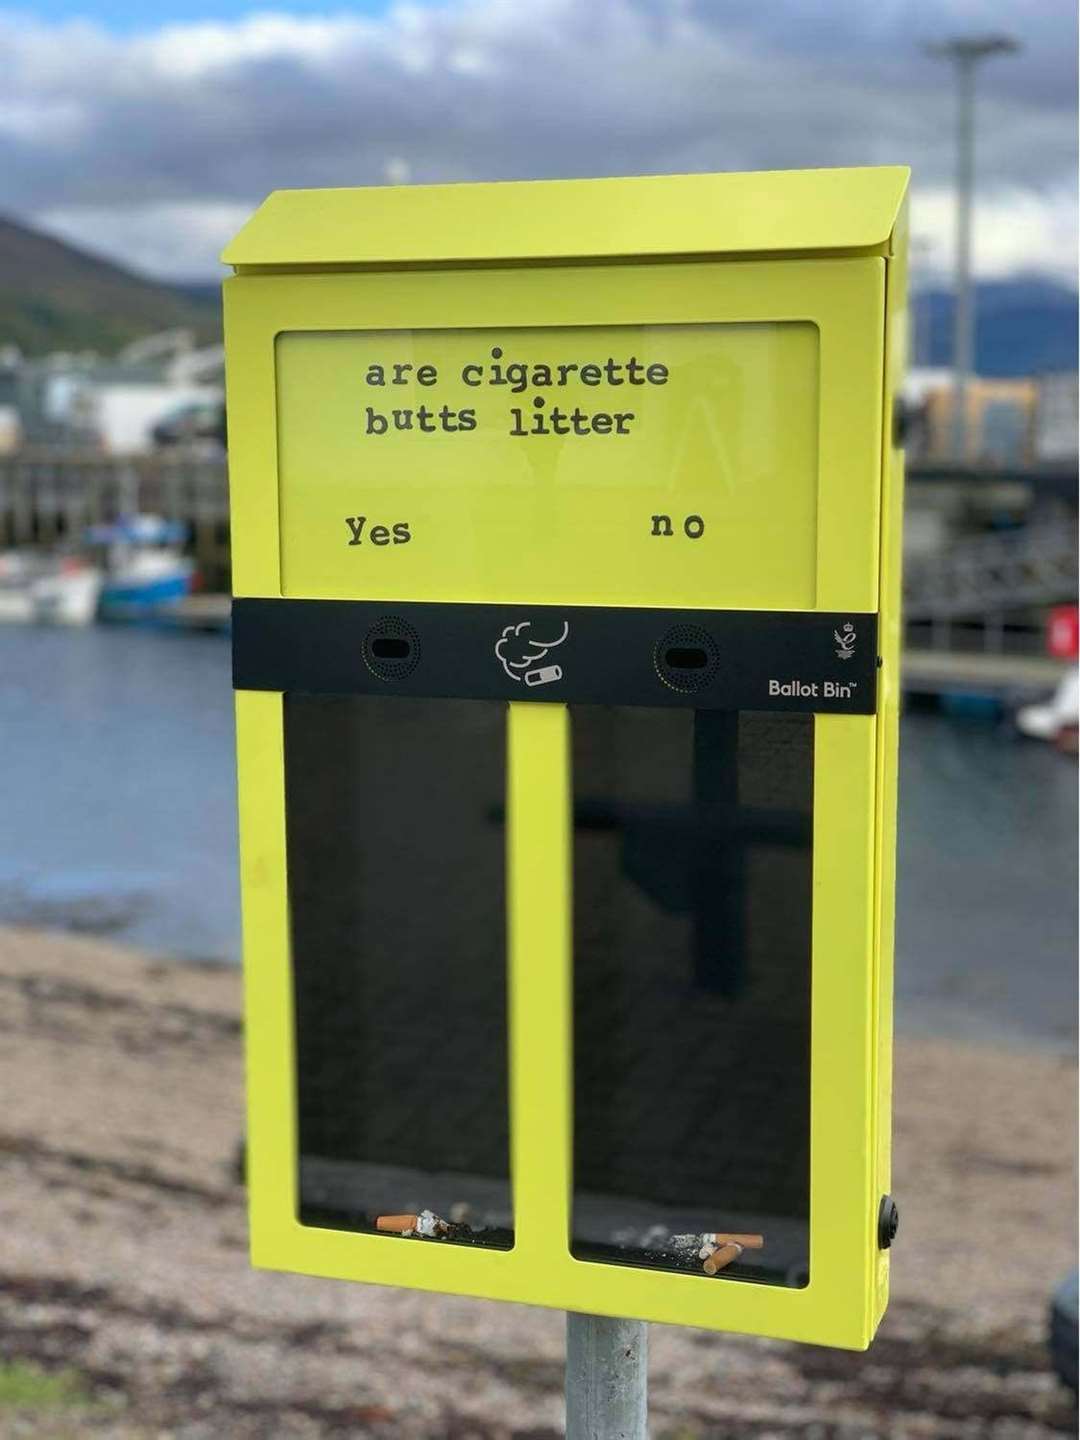 The yes/no ballot bin for cigarette butts